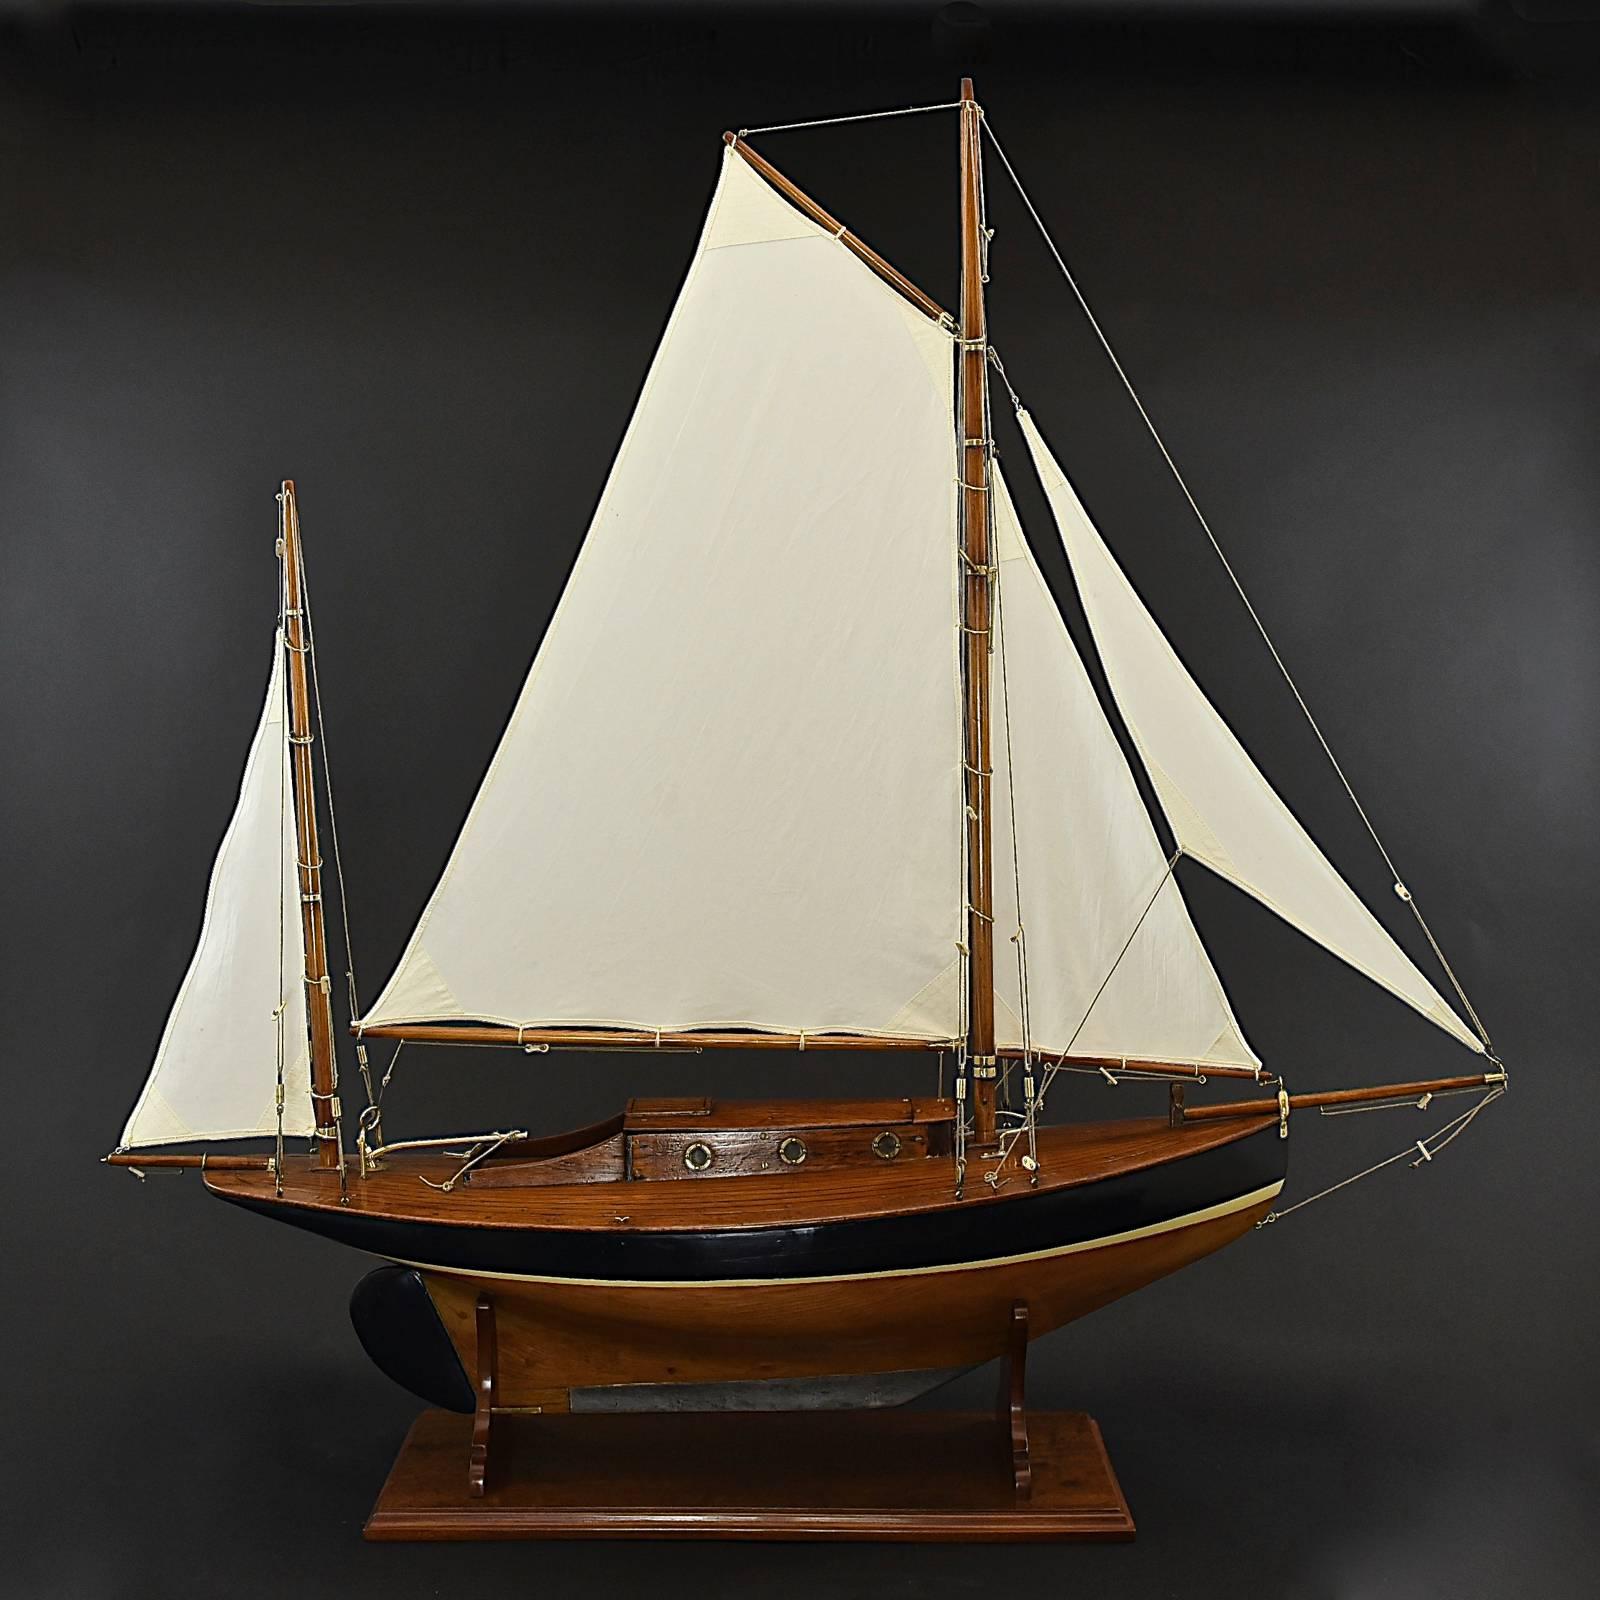 A lovely model Yawl, circa 1925 with a bow sprit, lead keel, gaff rigged main mast and a mizzen mast aft. Unusually it has a well-detailed cabin with handmade brass portholes and rudder.
The cotton sails are replicas of the originals and the model